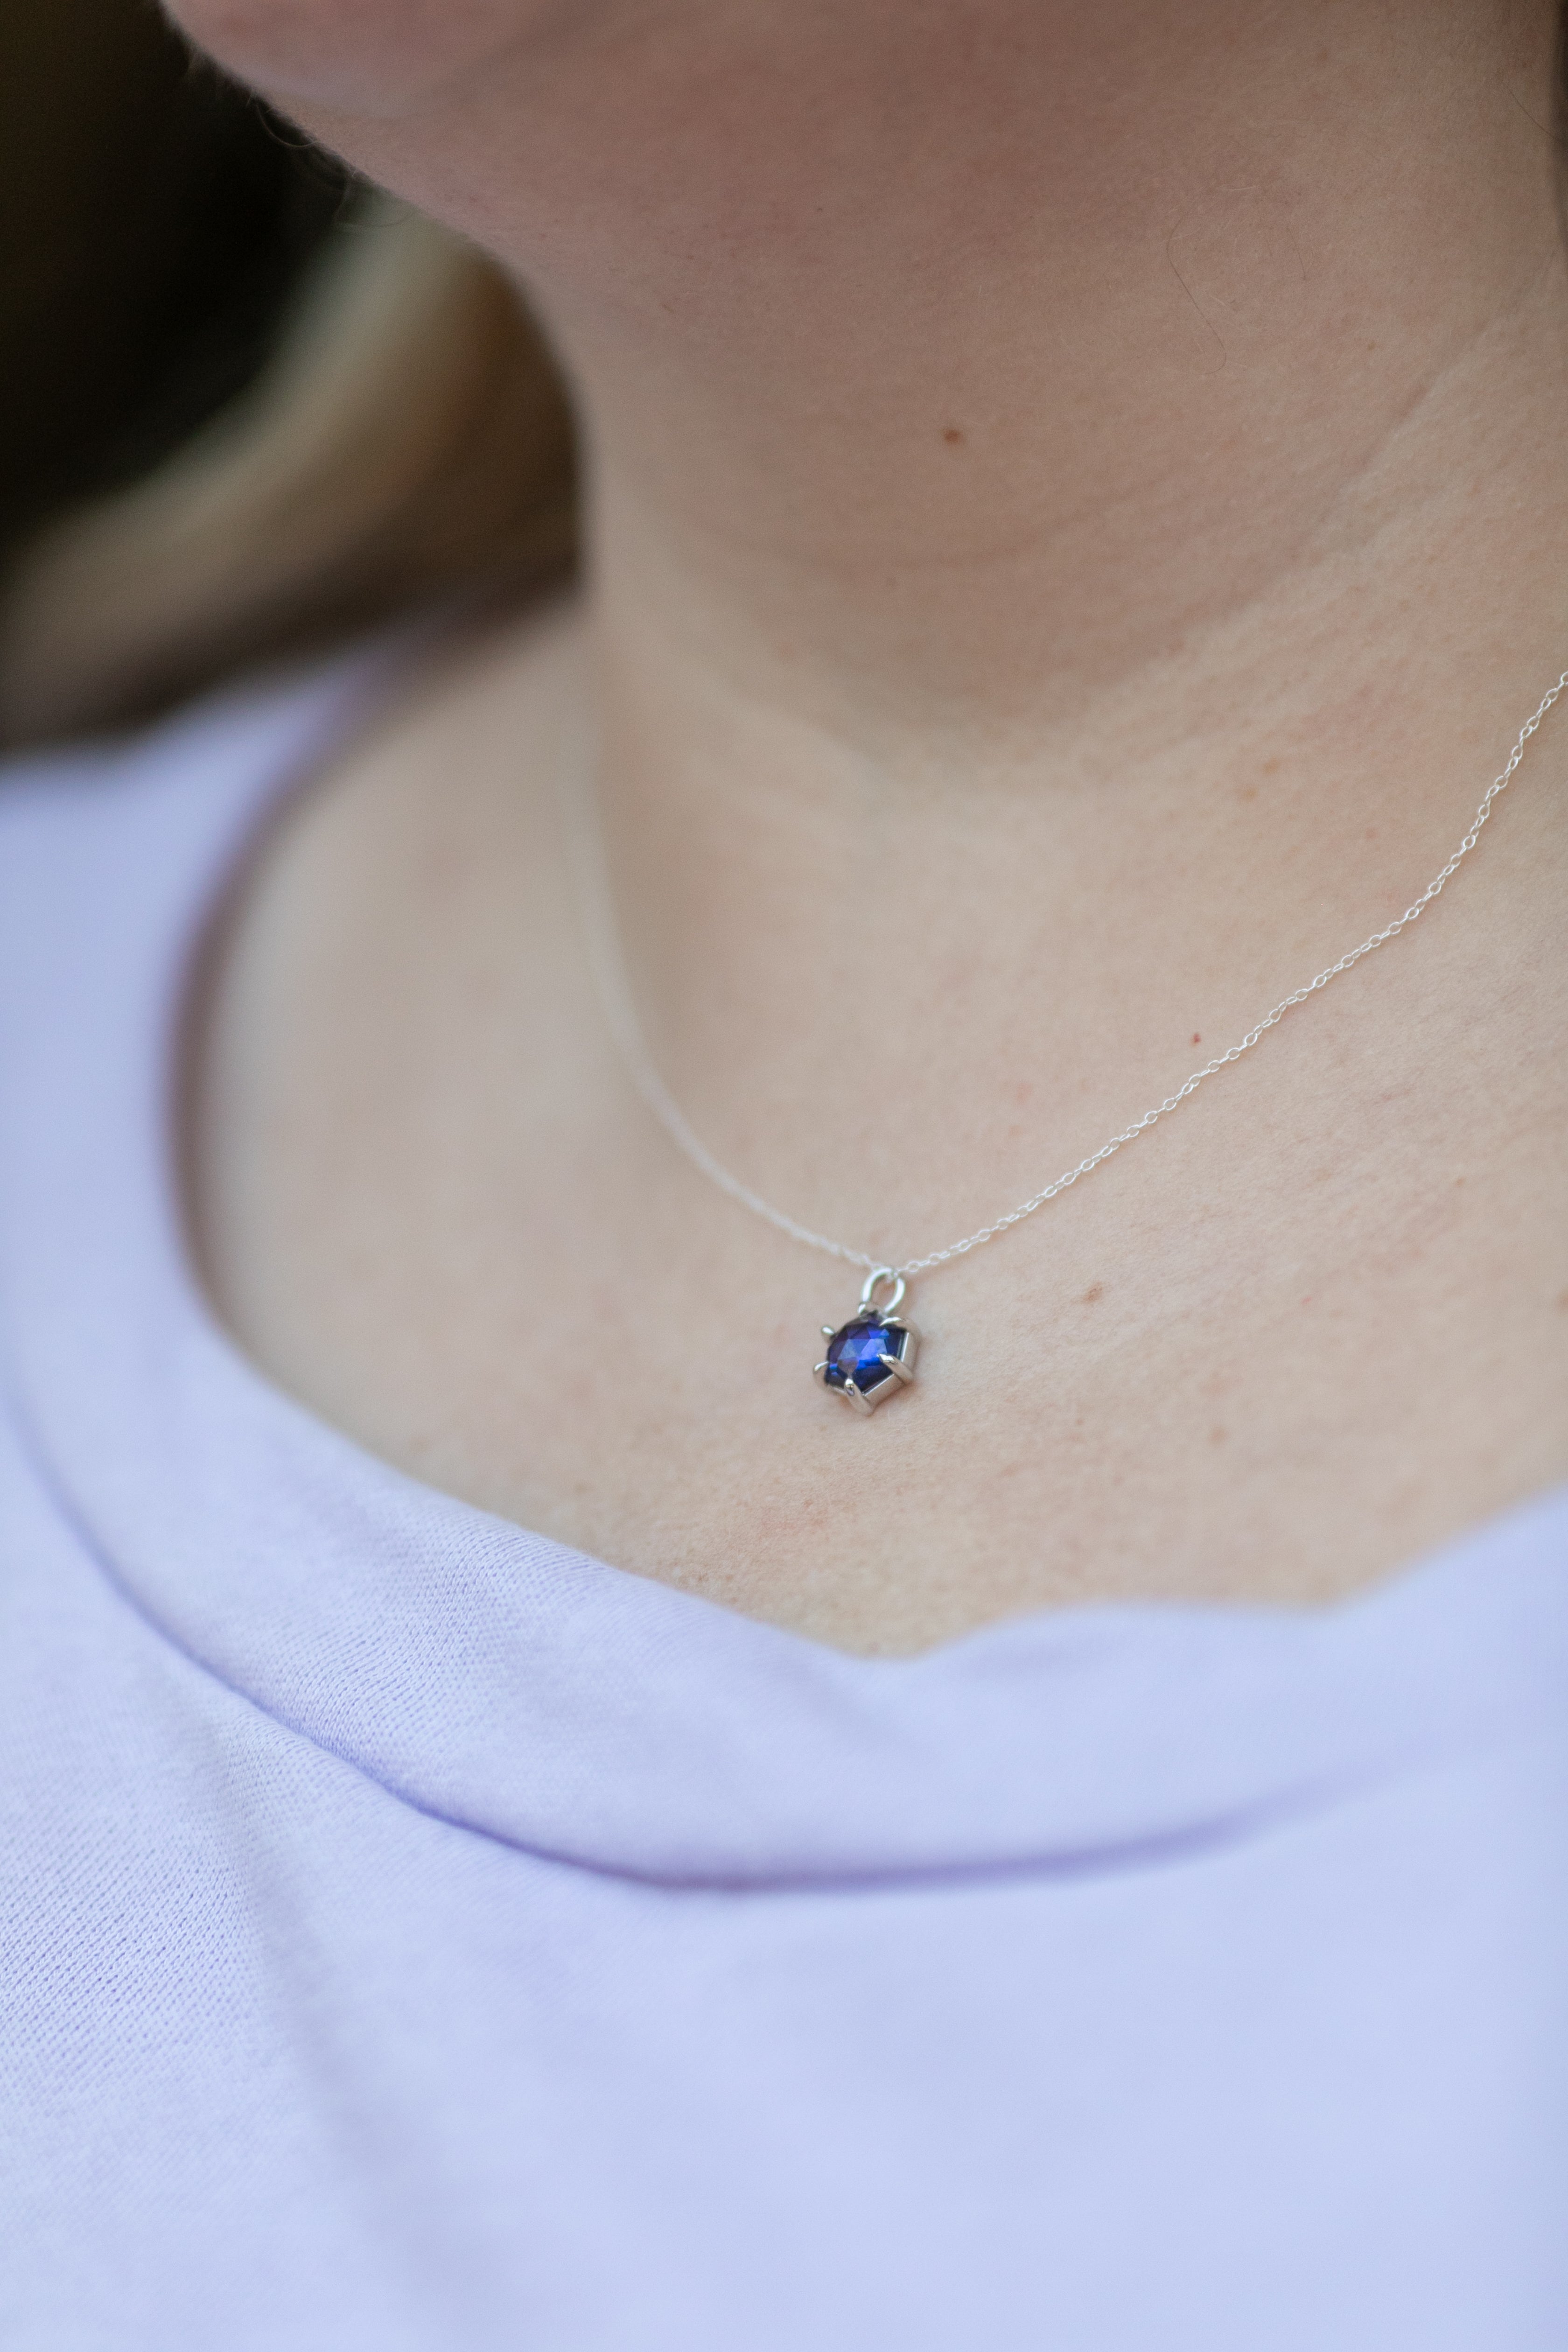 a hexagonal rose cut tanzanite set in a simple silver chain lays on a neck above a light lilac sweater